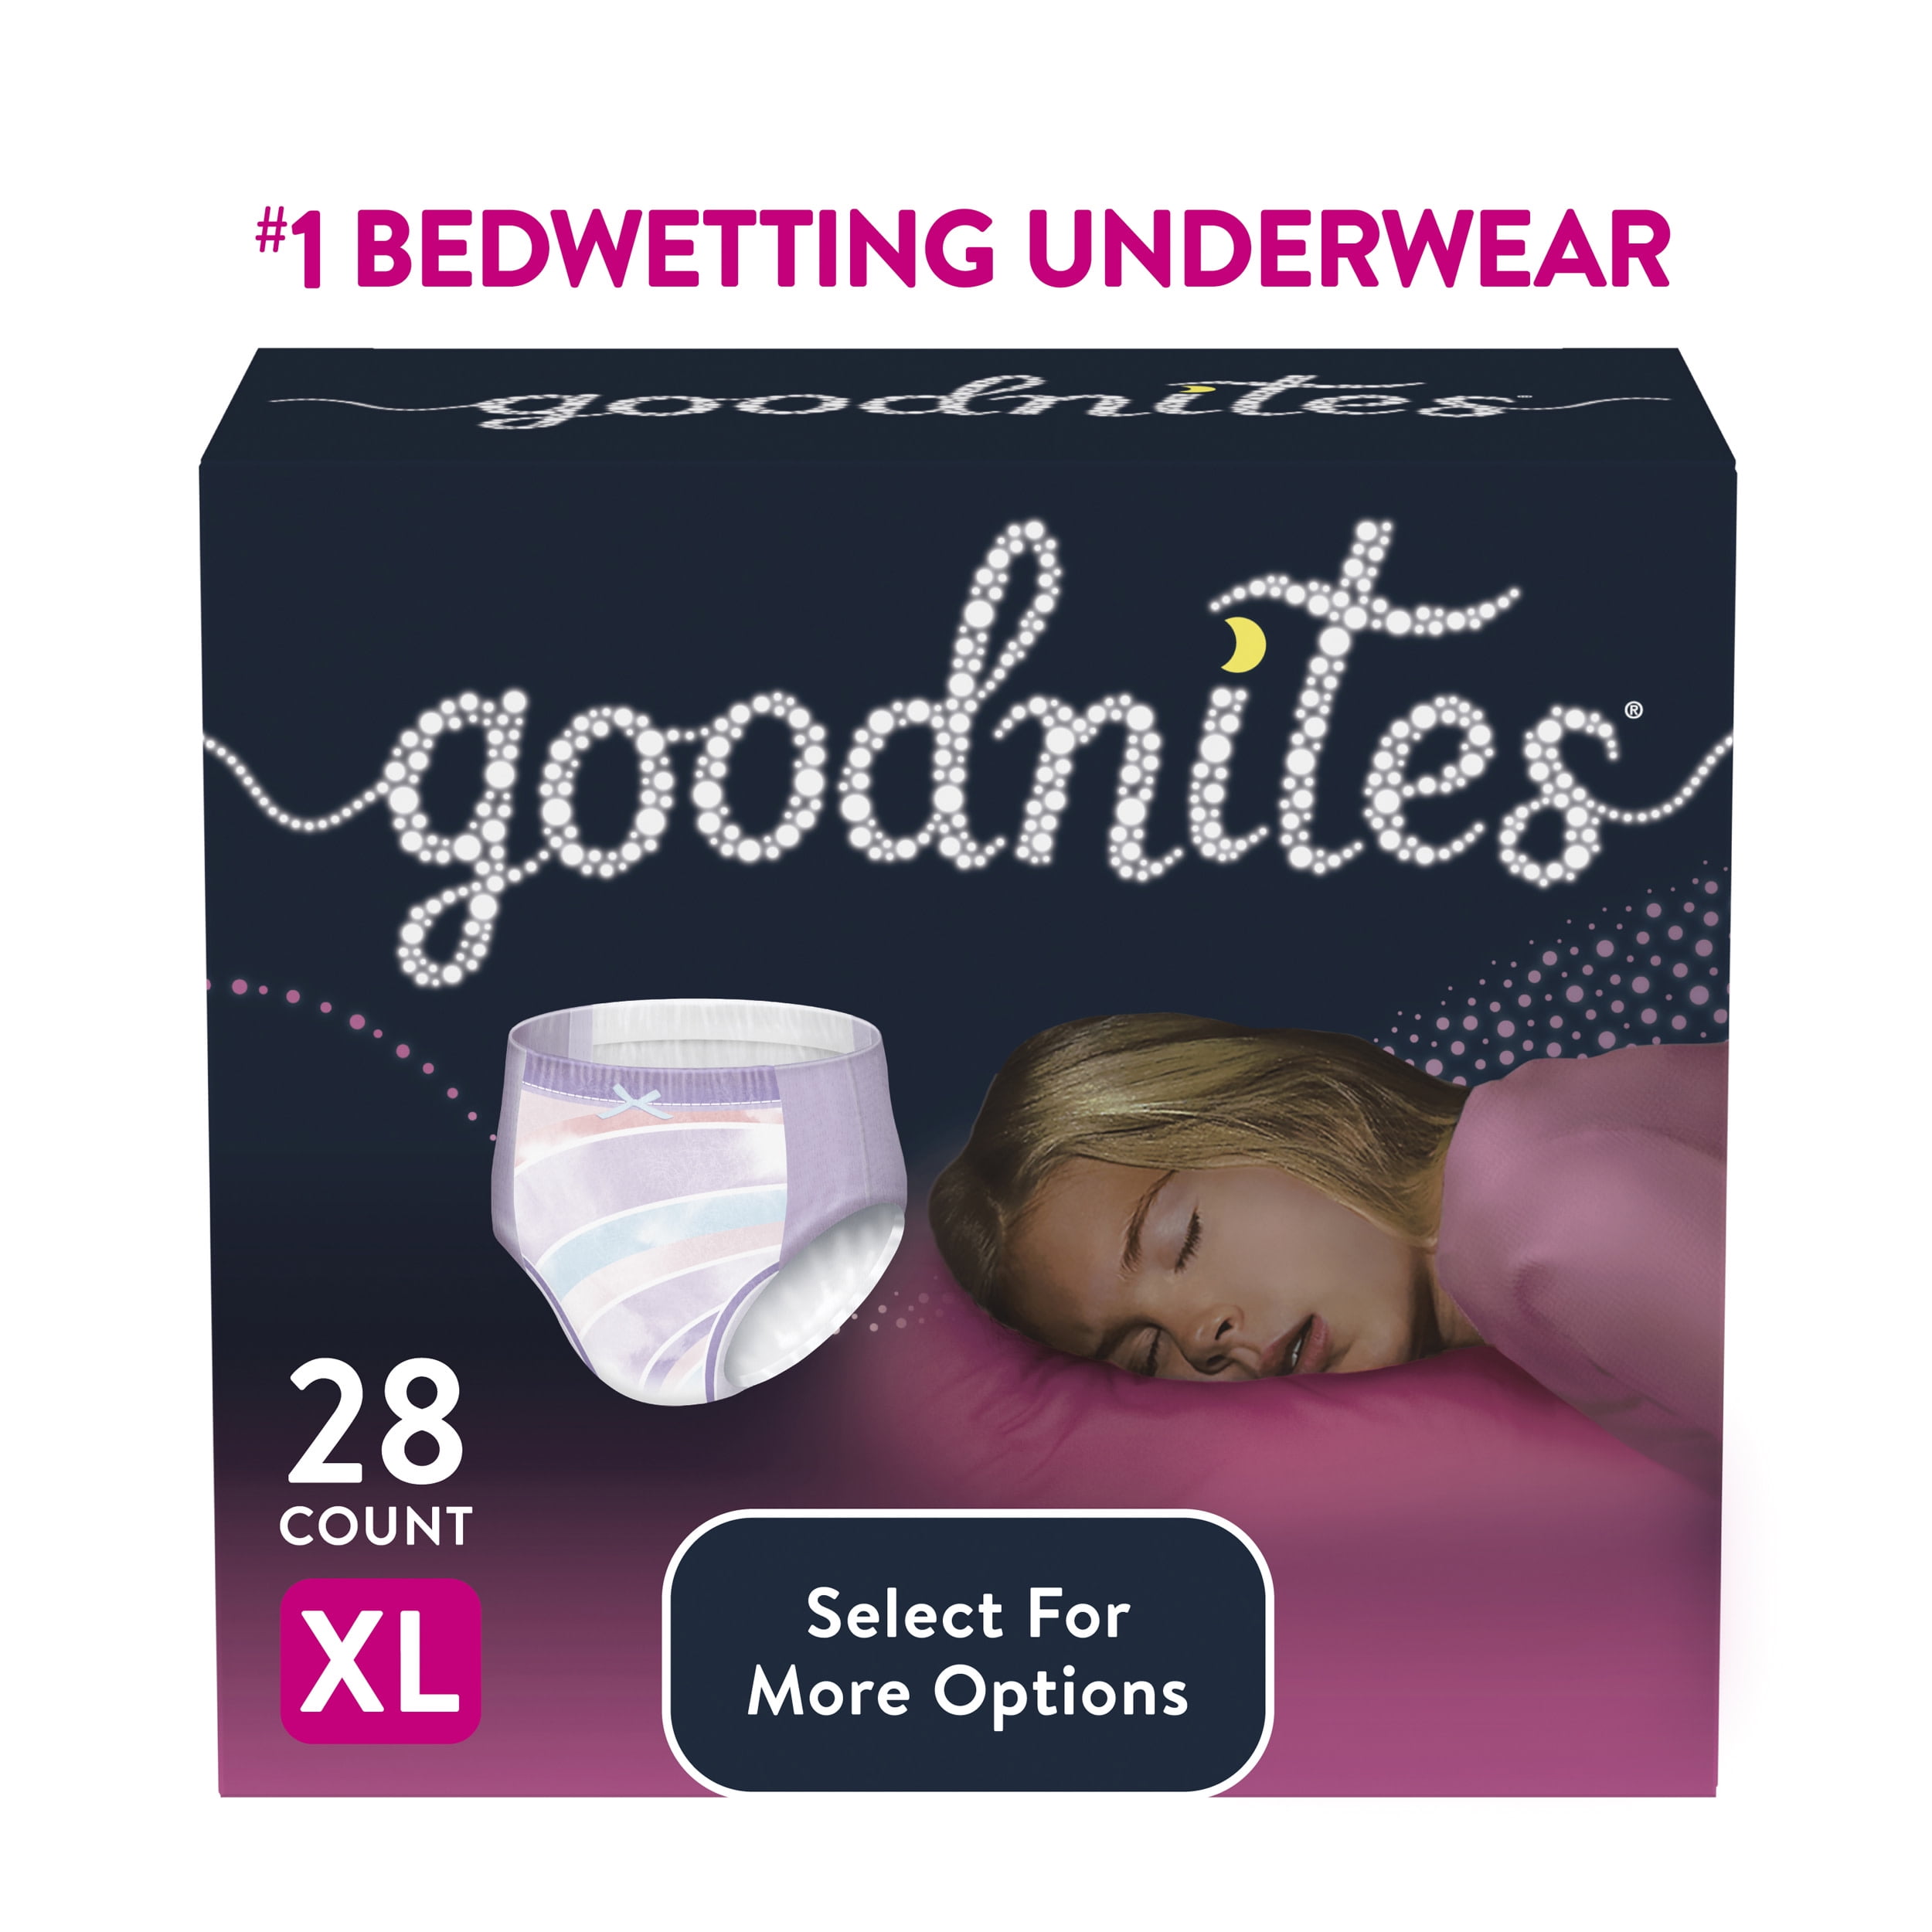 Goodnites - Try Goodnites® Nighttime Underwear for Boys & Girls, available  in expanded sizes L and XL for an even better fit! Buy Now